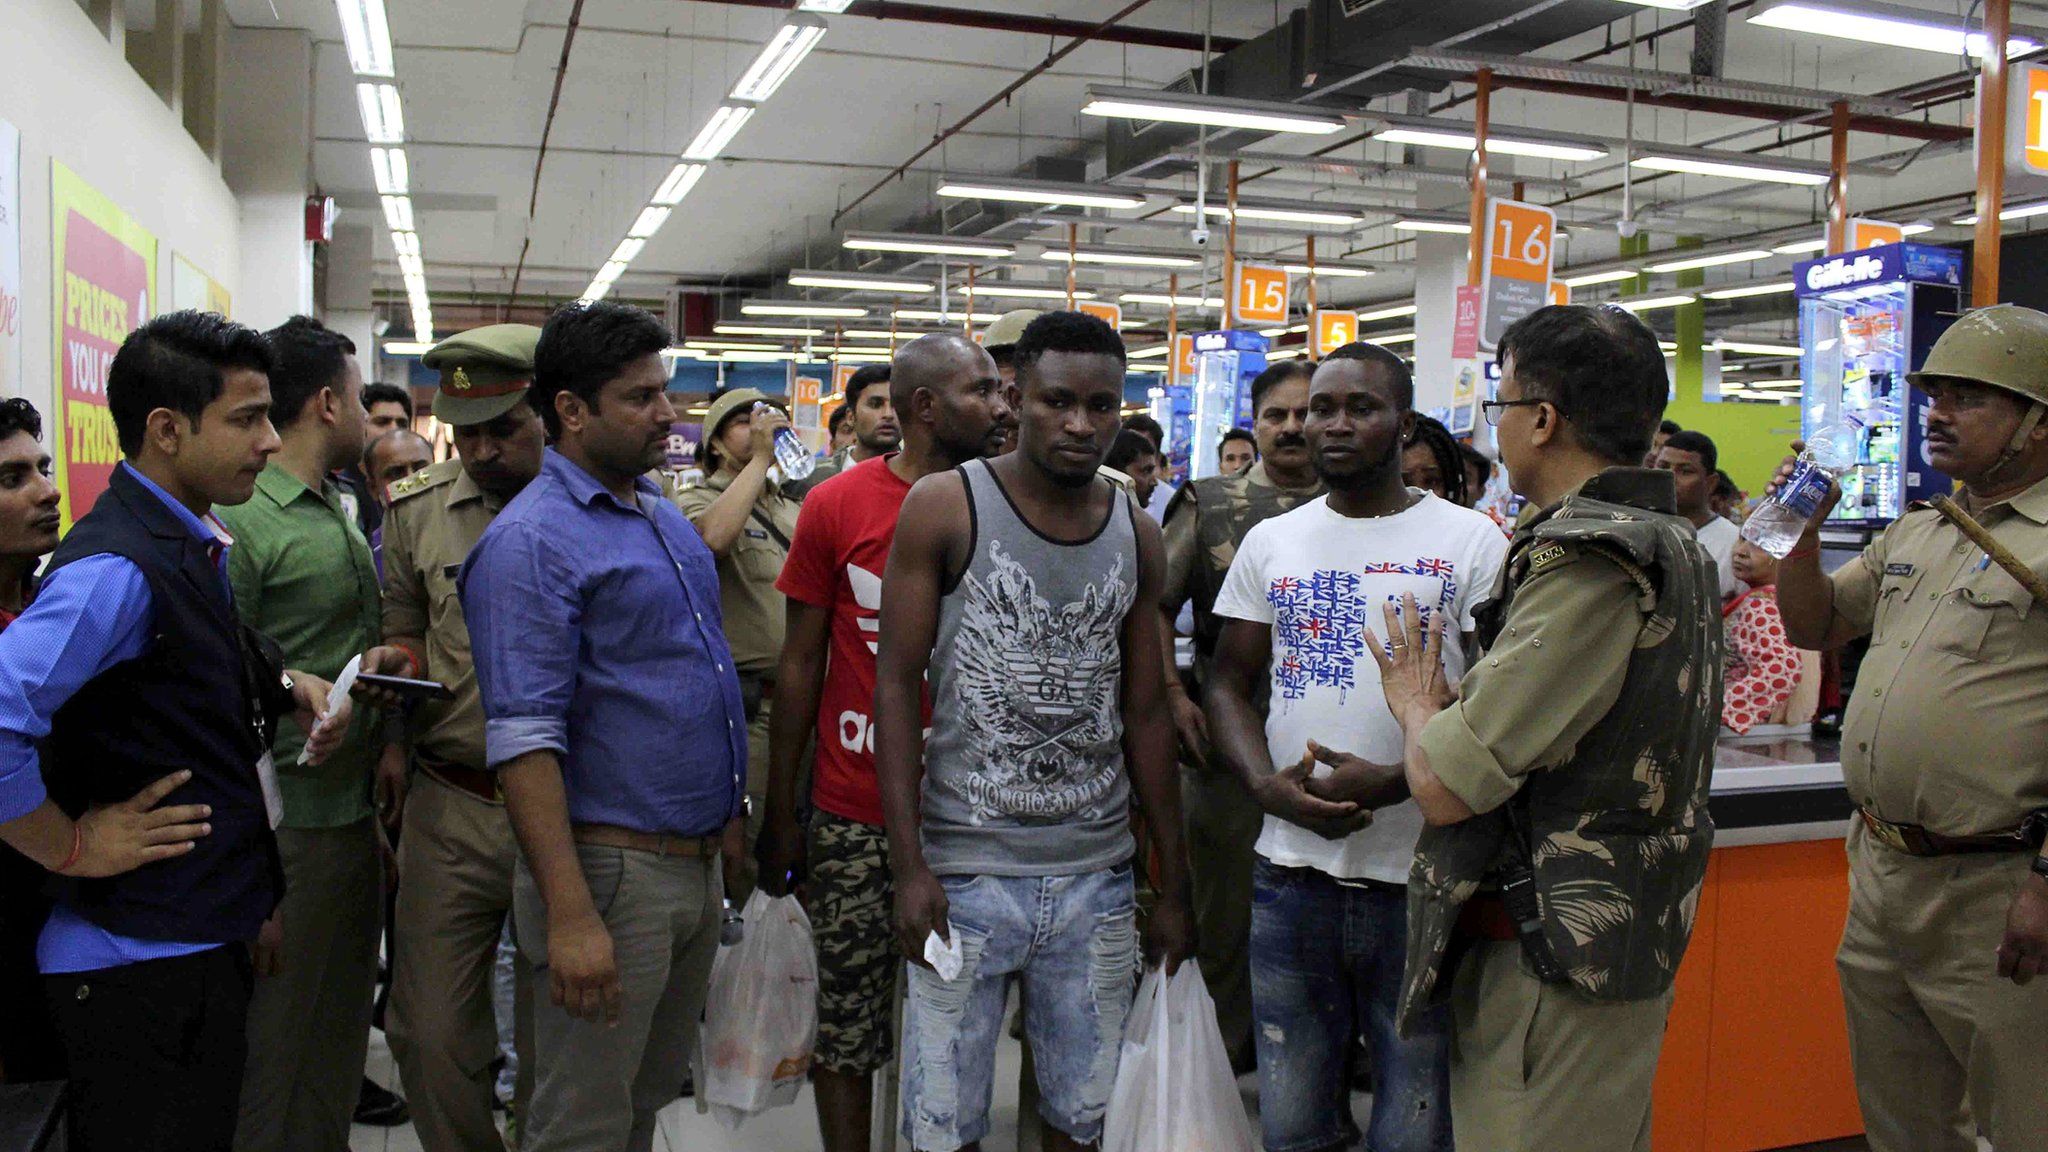 This photo taken on 27 March 2017 shows Indian police and onlookers surrounding African nationals at a shopping mall in Greater Noida